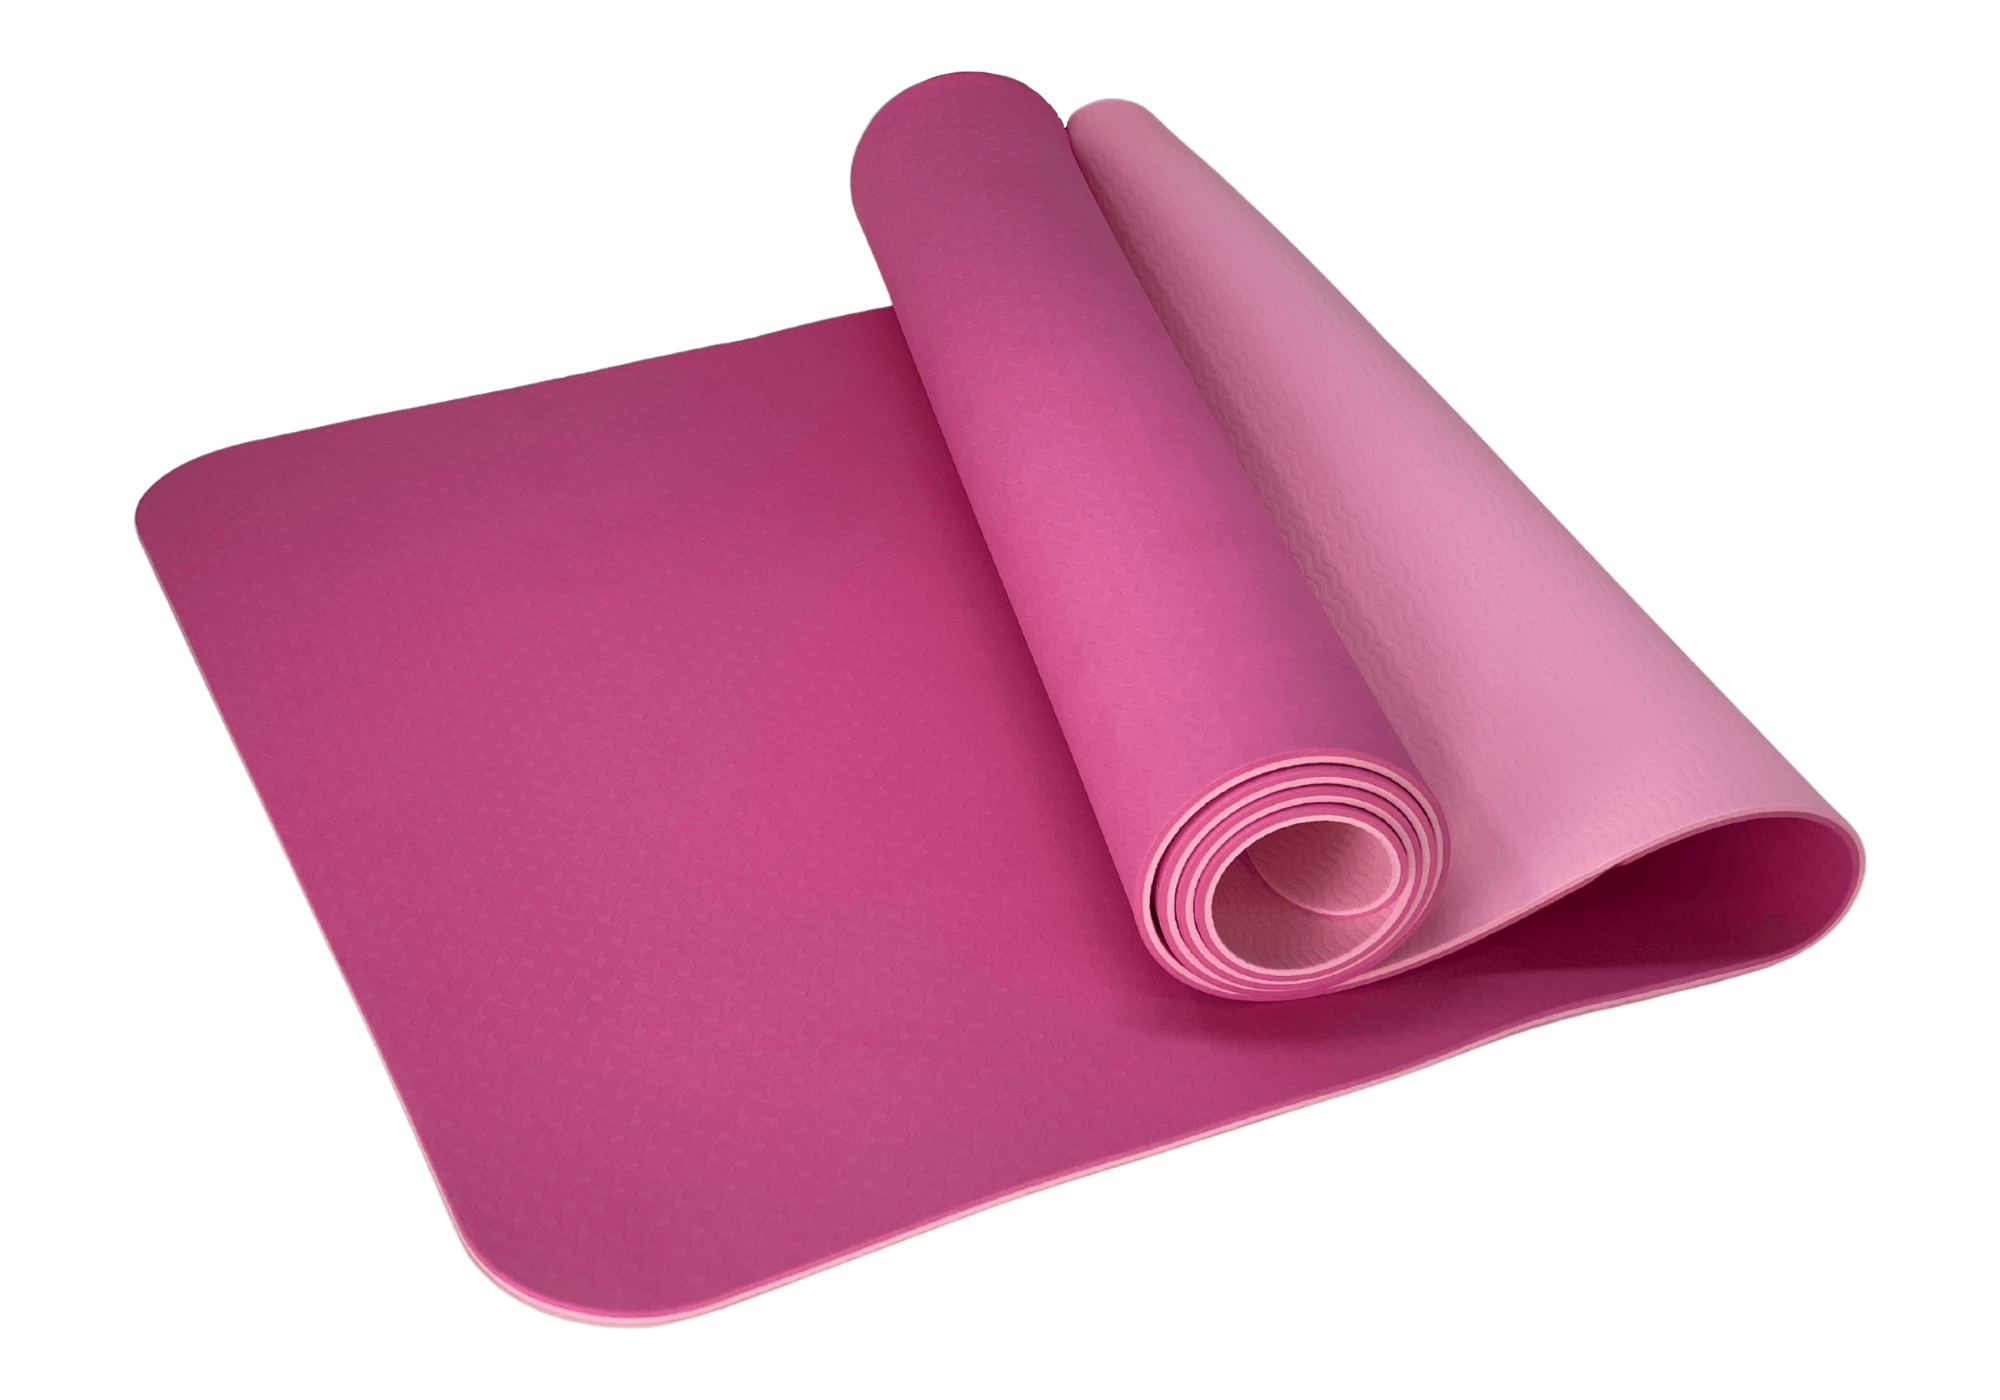 PG traders.Yoga and Exercise mat of 8mm (Light Pink) Yoga Mat with Yoga Mat  Carry Strap 100% Eco Friendly